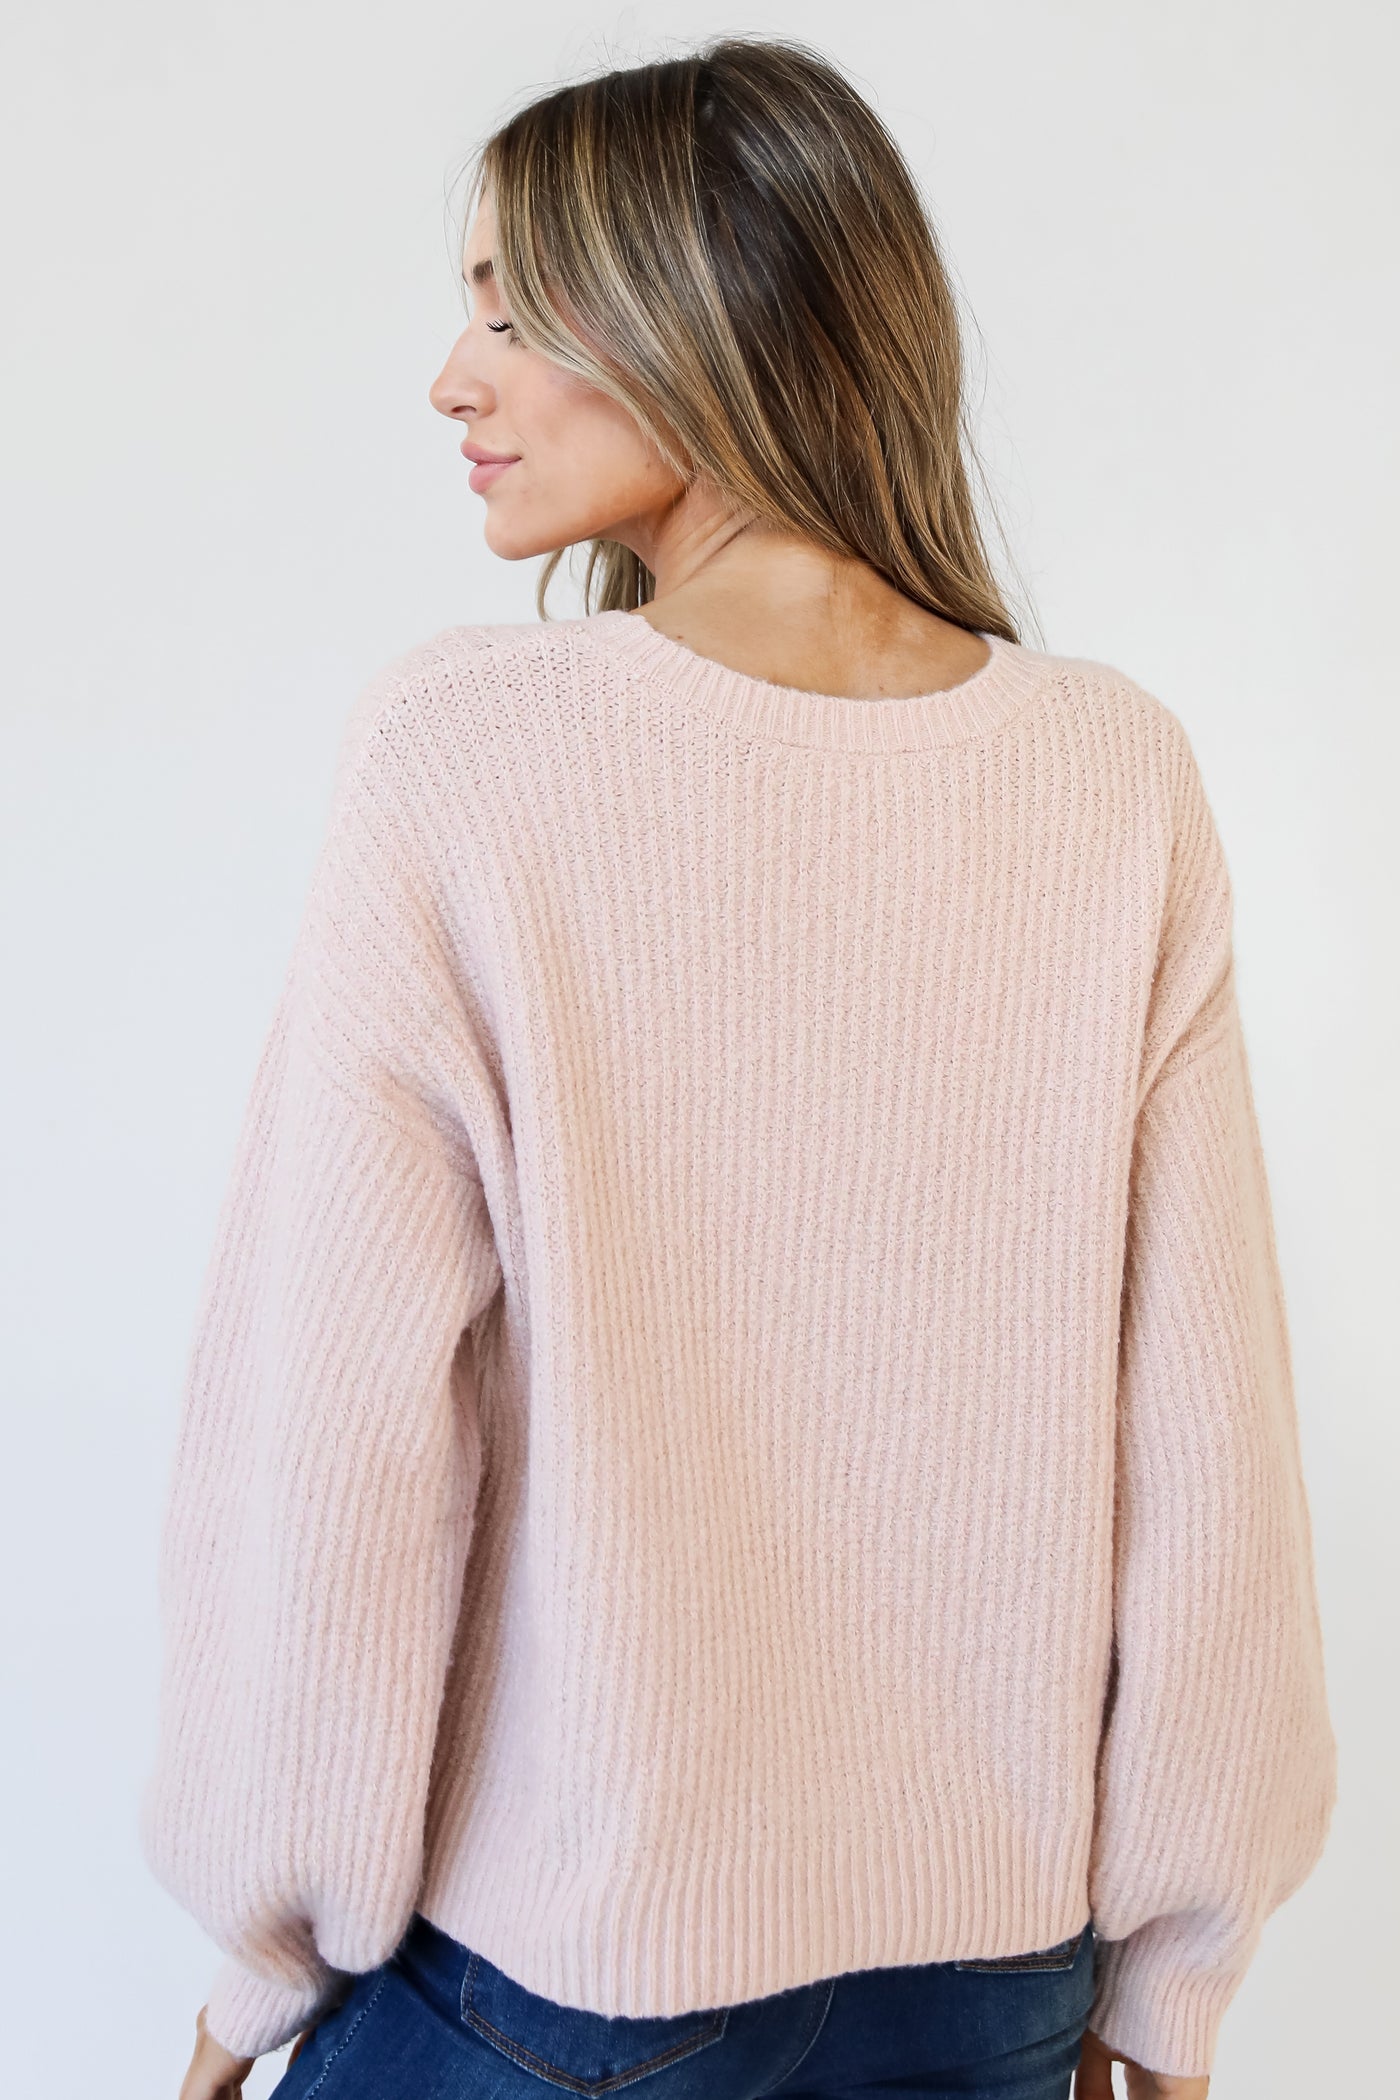 light pink Sweater back view